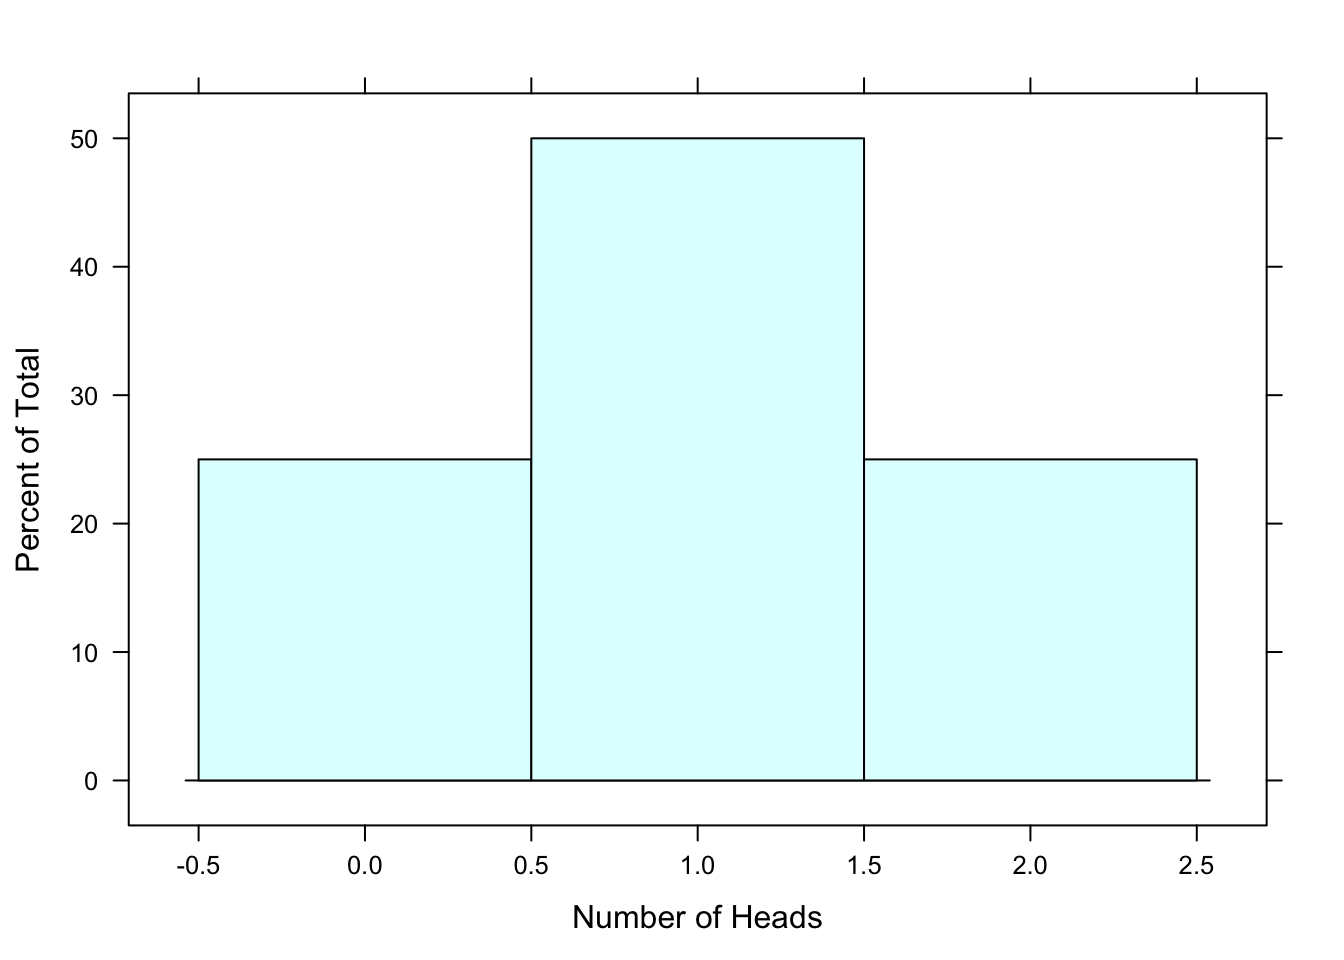 Two Coin Toss pdf:  The probability distribution function, in histogram form, for a two coin toss.